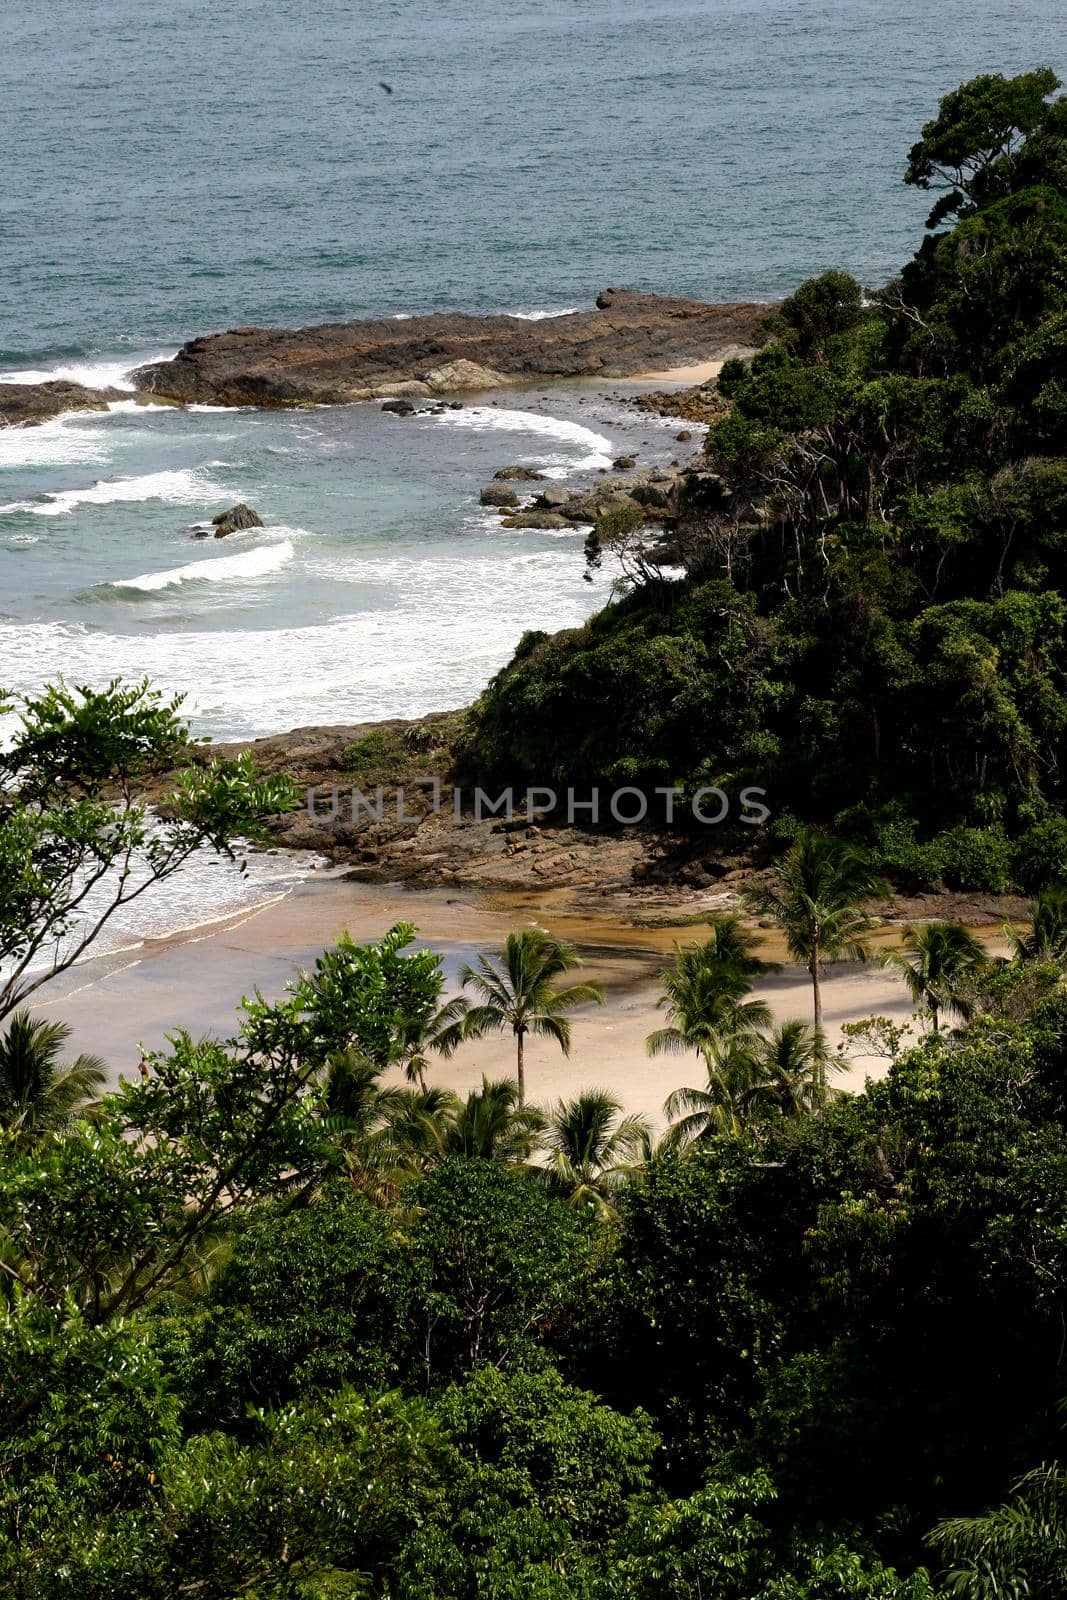 itacare, bahia / brazil - january 12, 2012: View of the Havaizinho Beach in Itacare. The place is between the sea and the Atlantic Forest, in southern Bahia.